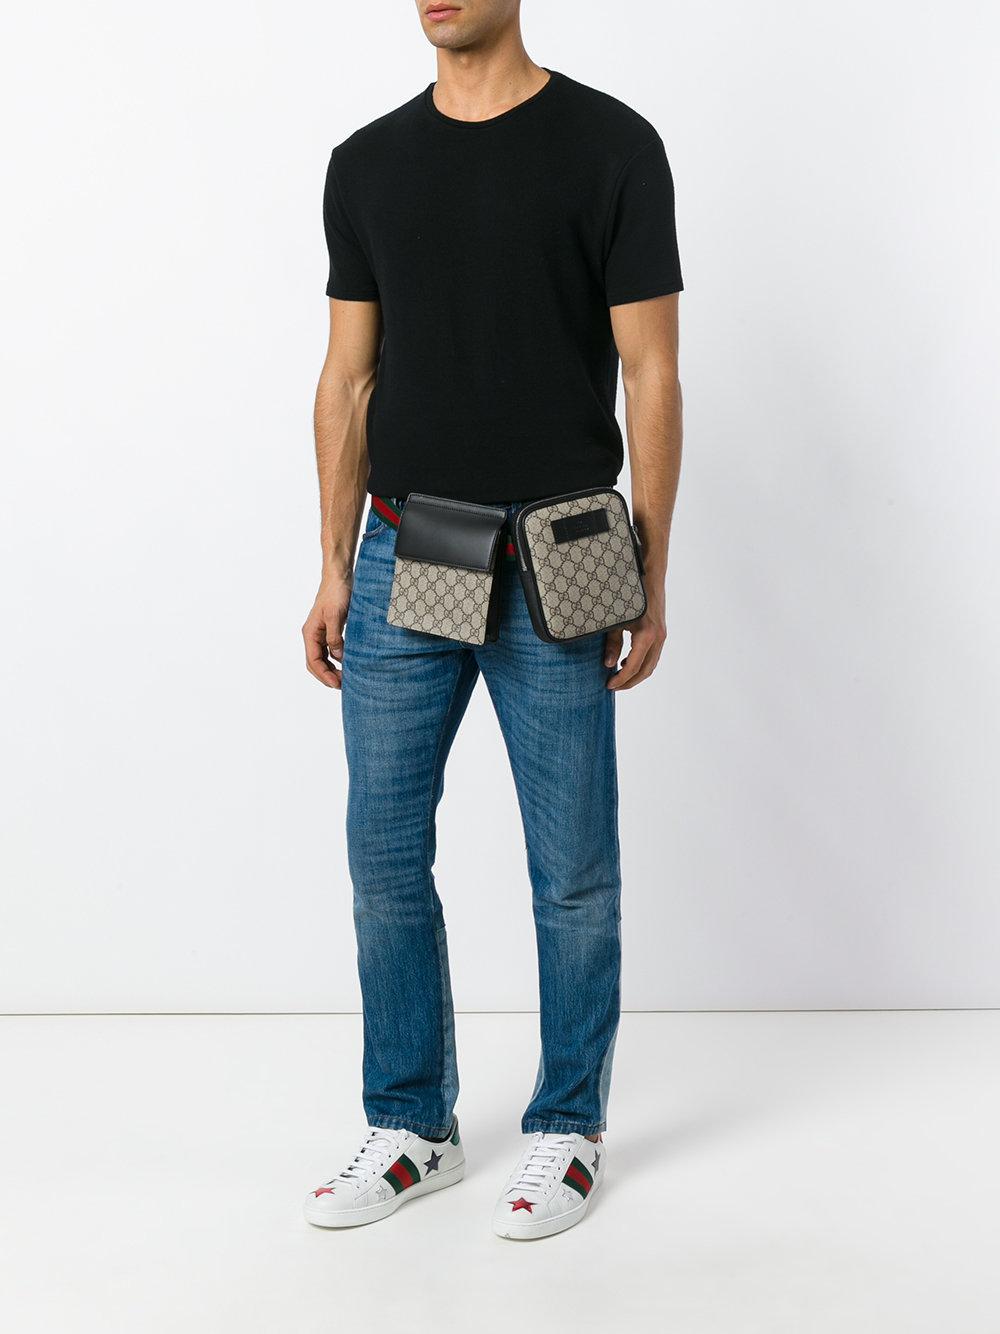 gucci two pouch belt bag